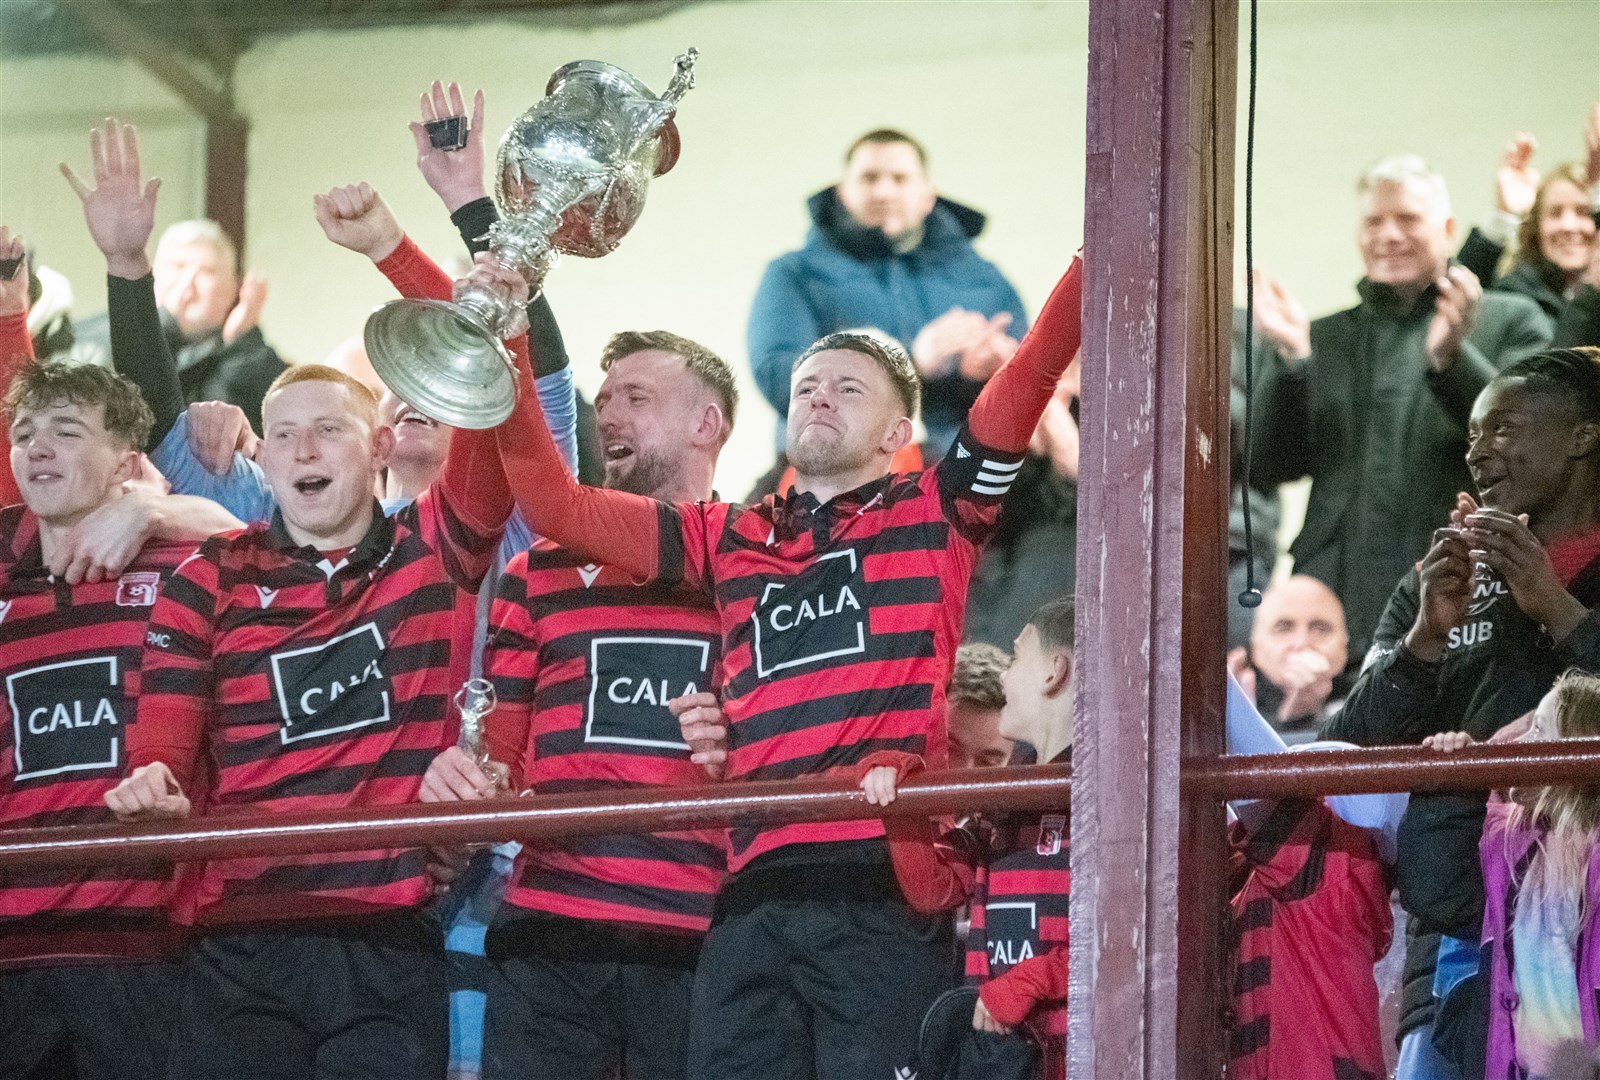 Inverurie Locos lift the cup. Inverurie Loco Works (0) vs Buckie Thistle FC (0) Inverurie win 7-6 on penalties - Aberdeenshire Cup Final - Kynoch Park 23/04/2024.Picture: Daniel Forsyth.